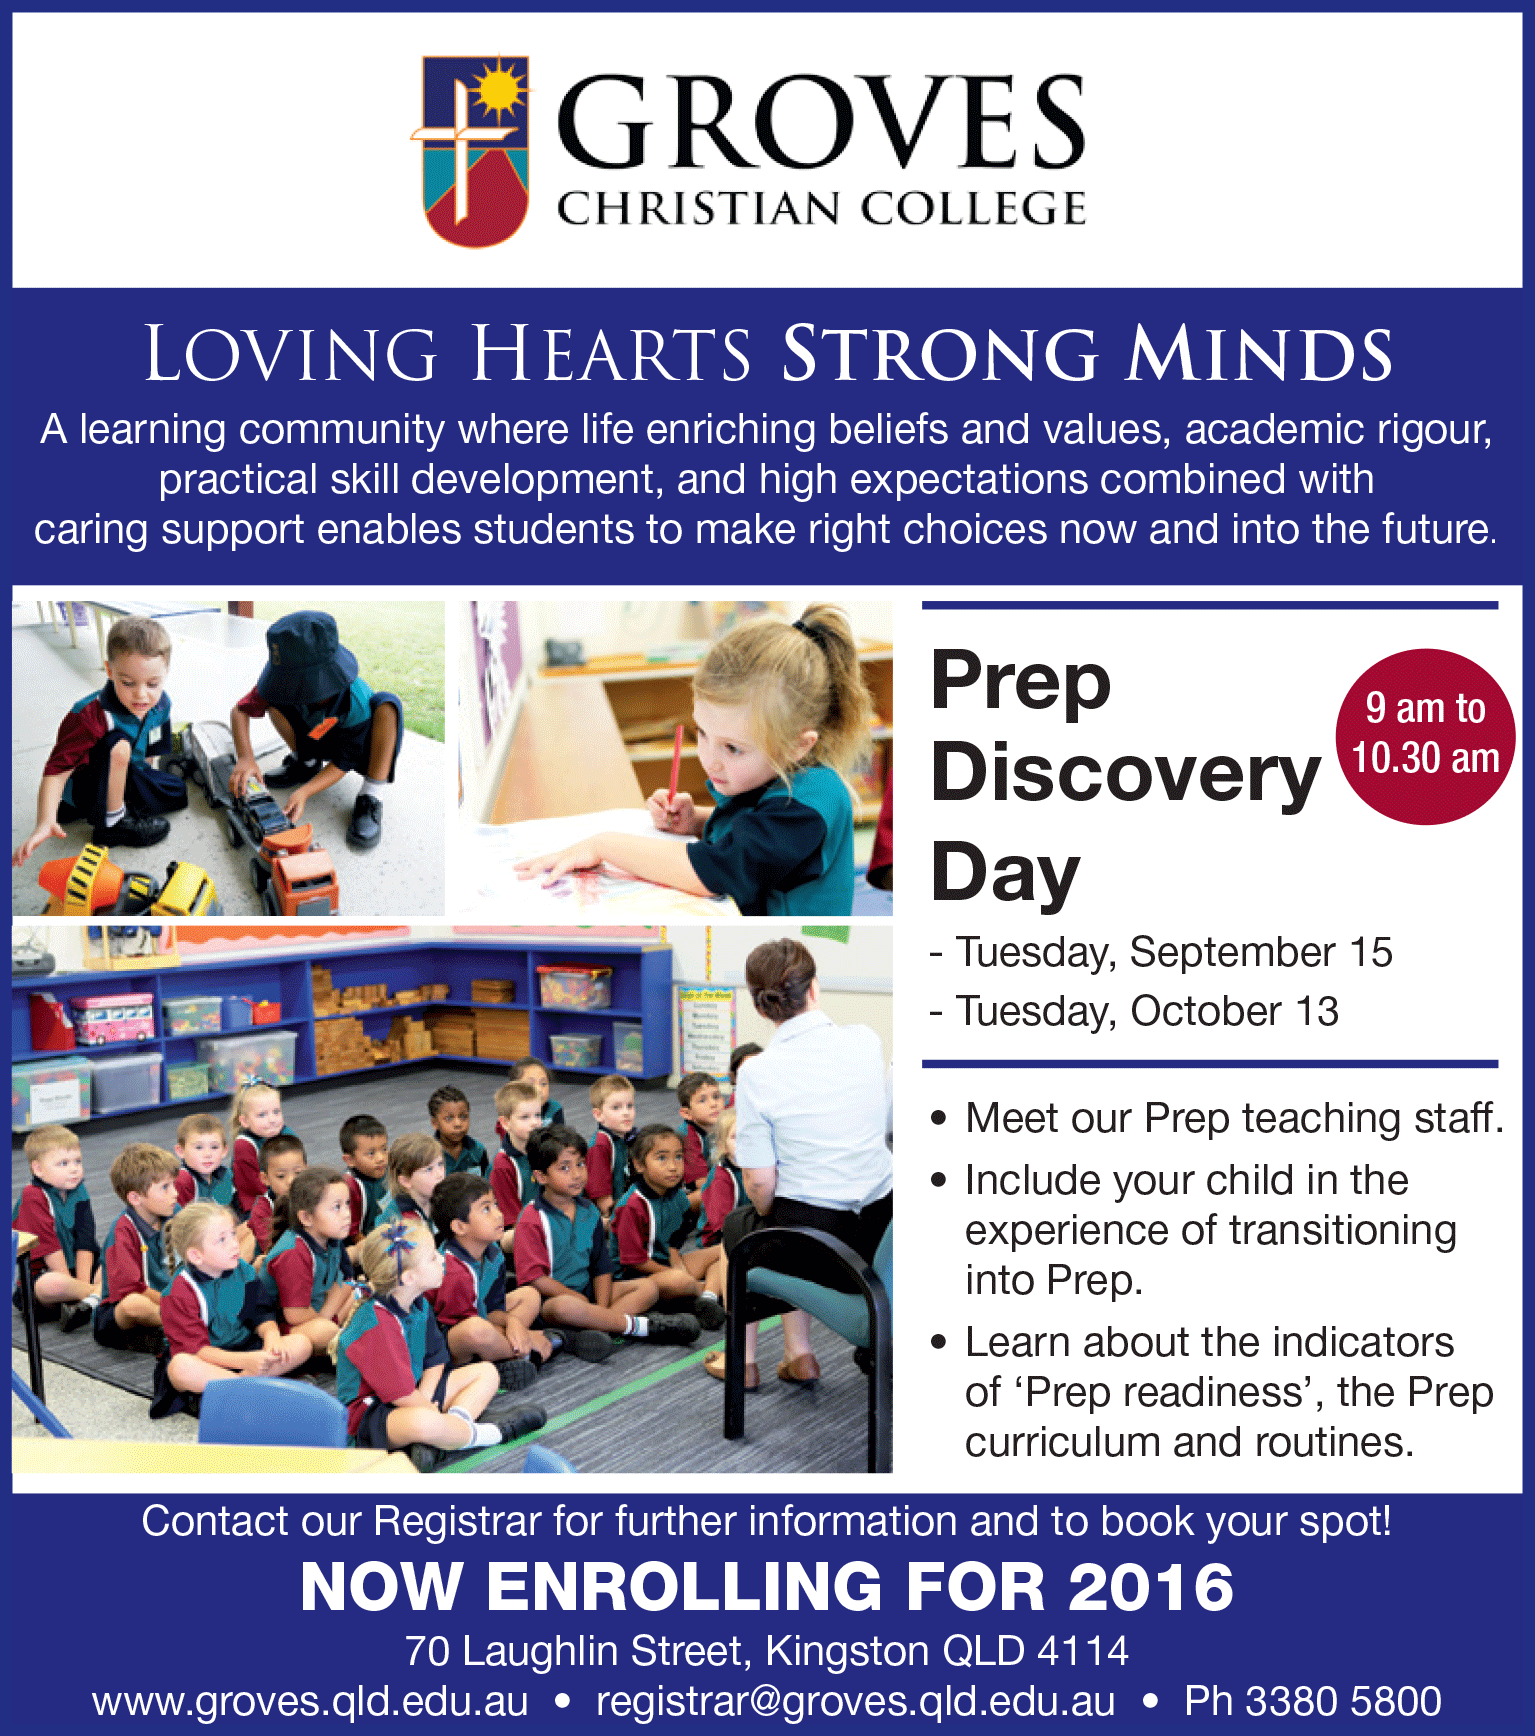 Prep Discovery Day